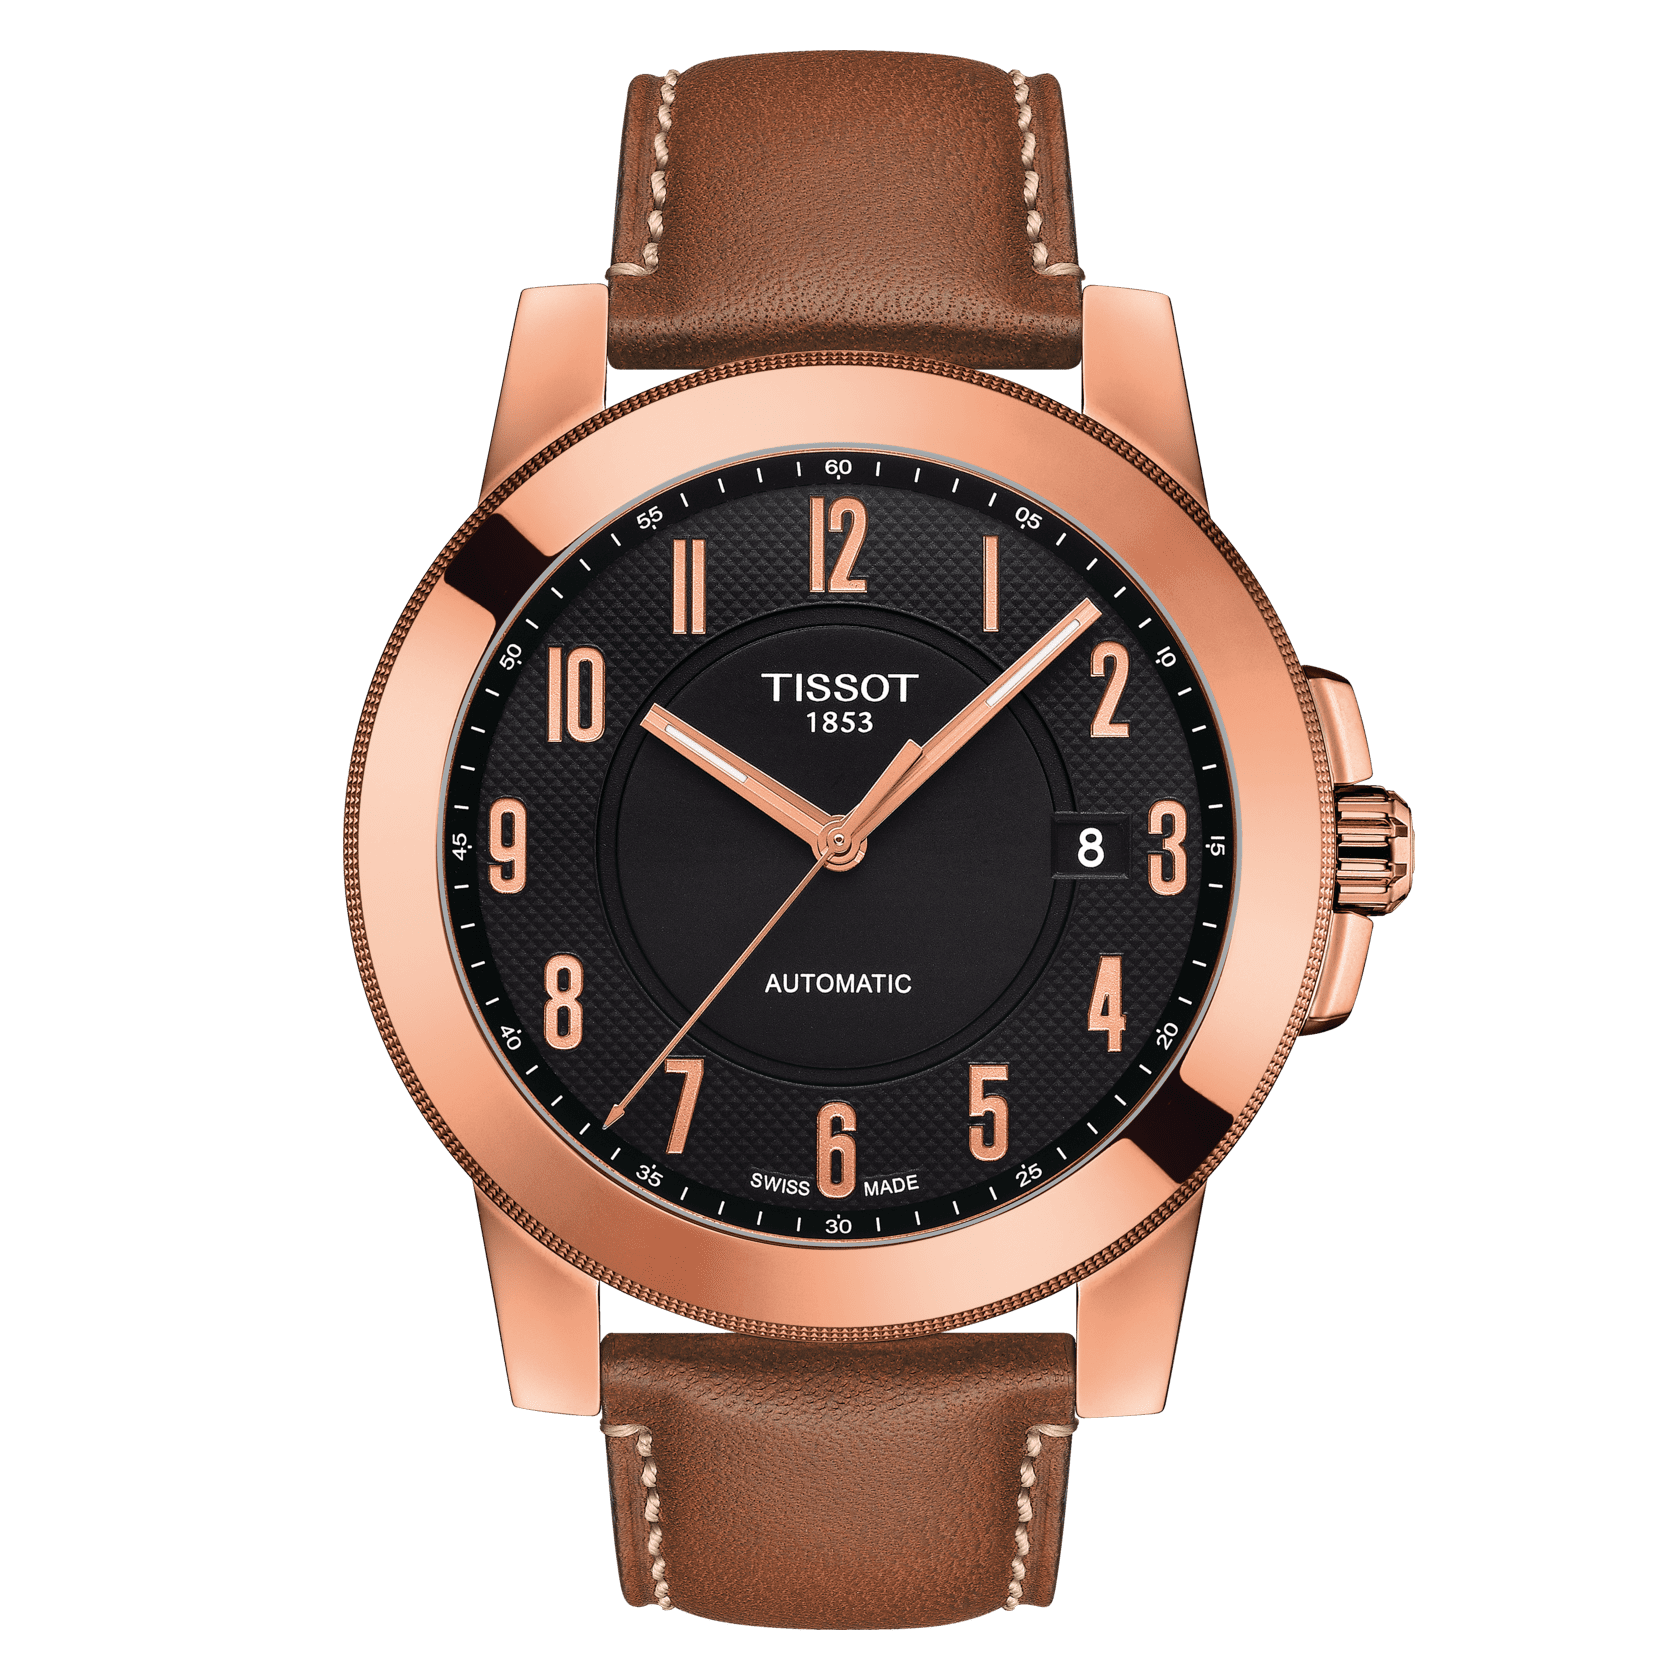 Replica Mens Watches Sites